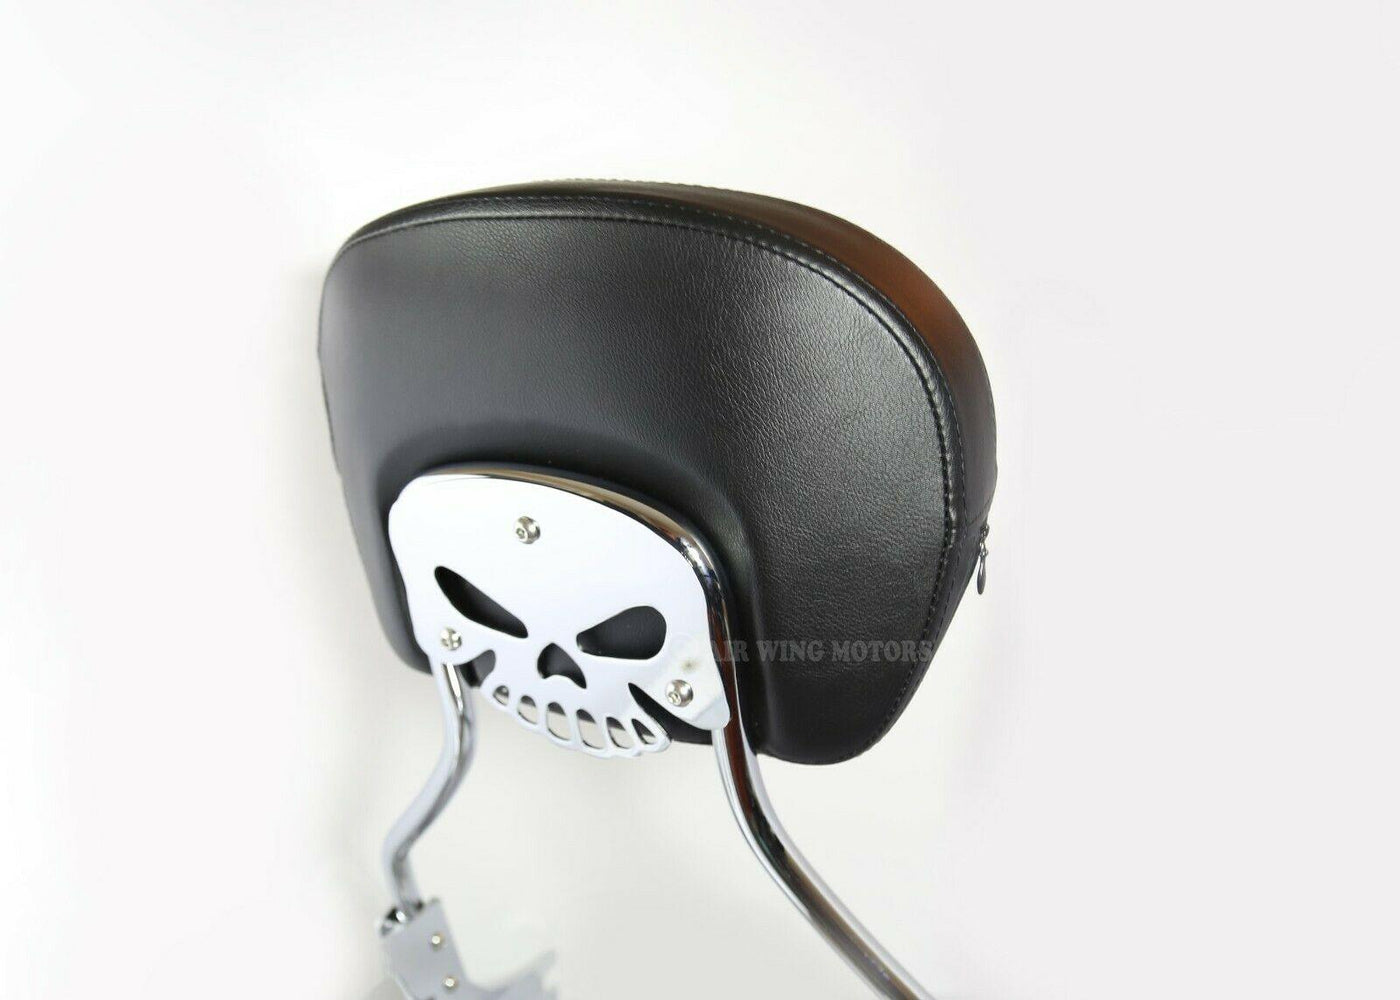 Chrome Sissy Bar Upright Backrest Pad Plate w/ Skull-Shaped for HD H-D Harley - Moto Life Products